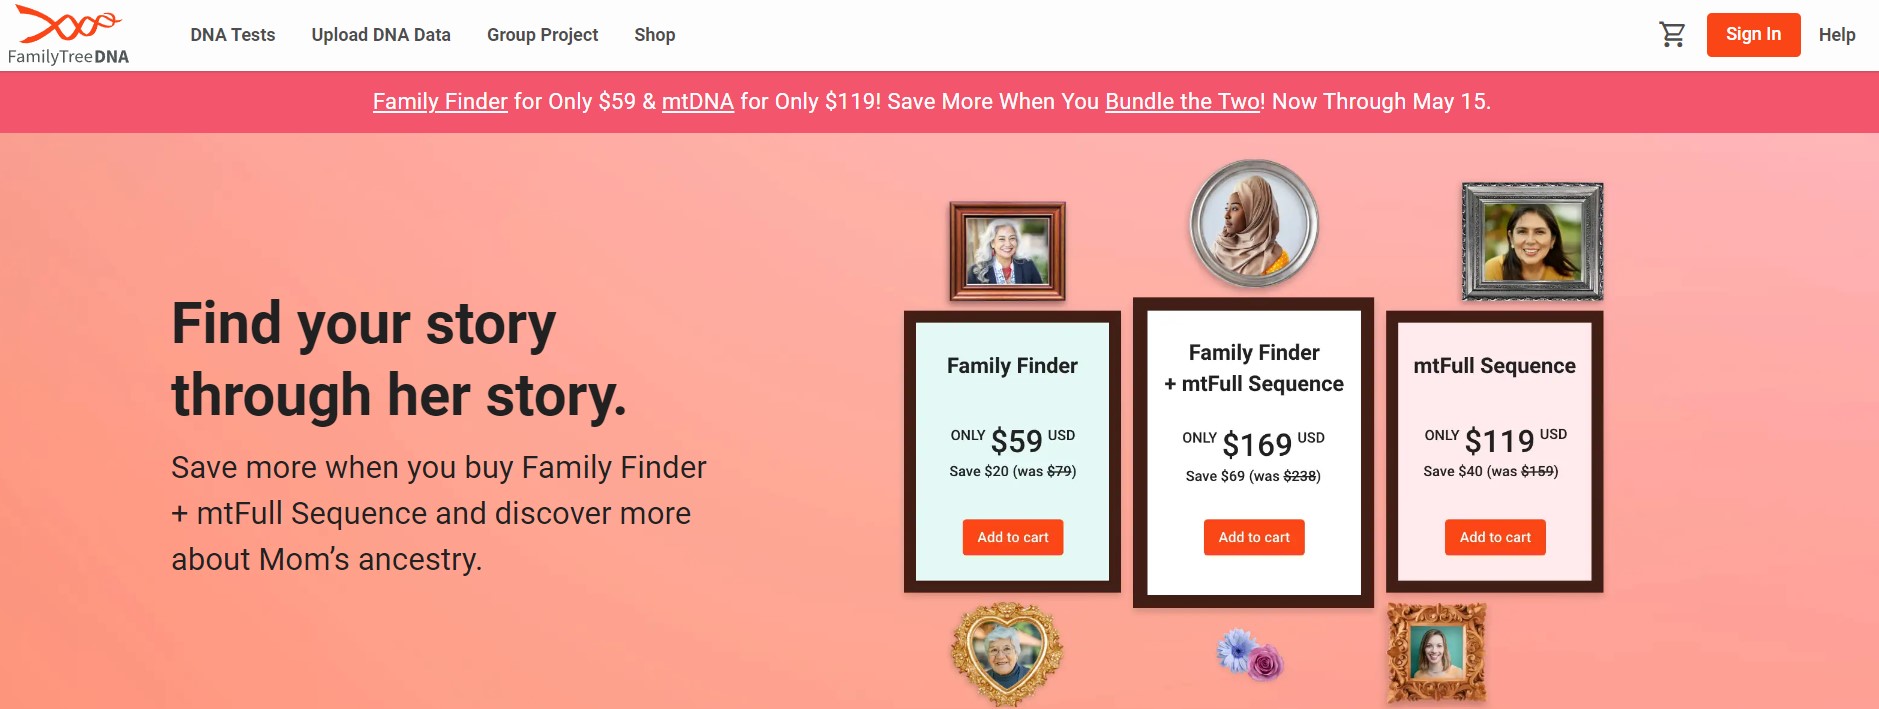 Save up to $50 USD at FamilyTreeDNA and discover more about your mother and your ancestry during the FamilyTreeDNA Mother's Day Sale now through May 15th, 2023. Save more when you buy Family Finder + mtFull Sequence and discover more about Mom’s ancestry.